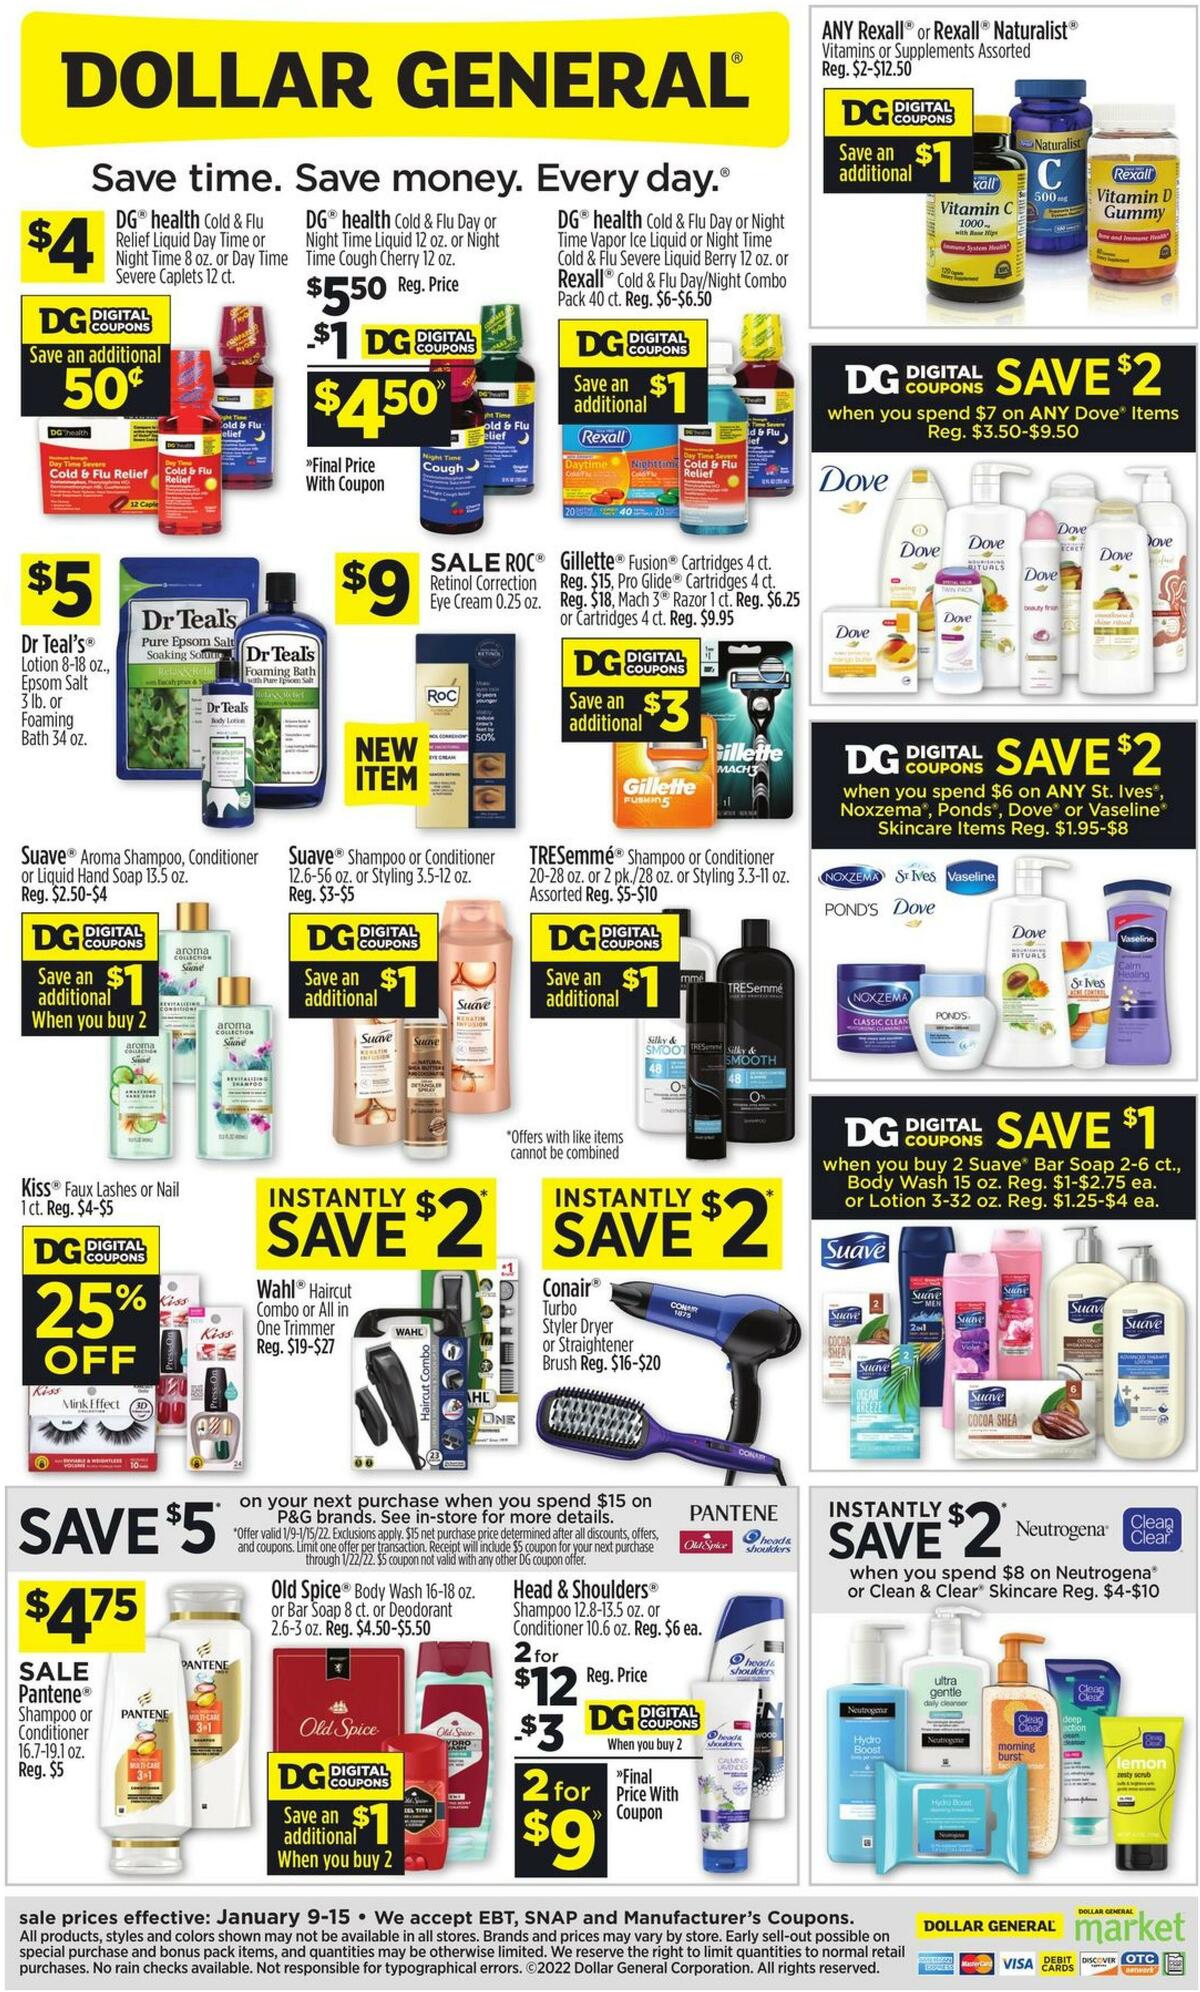 Dollar General Health & Beauty Deals Weekly Ad from January 9